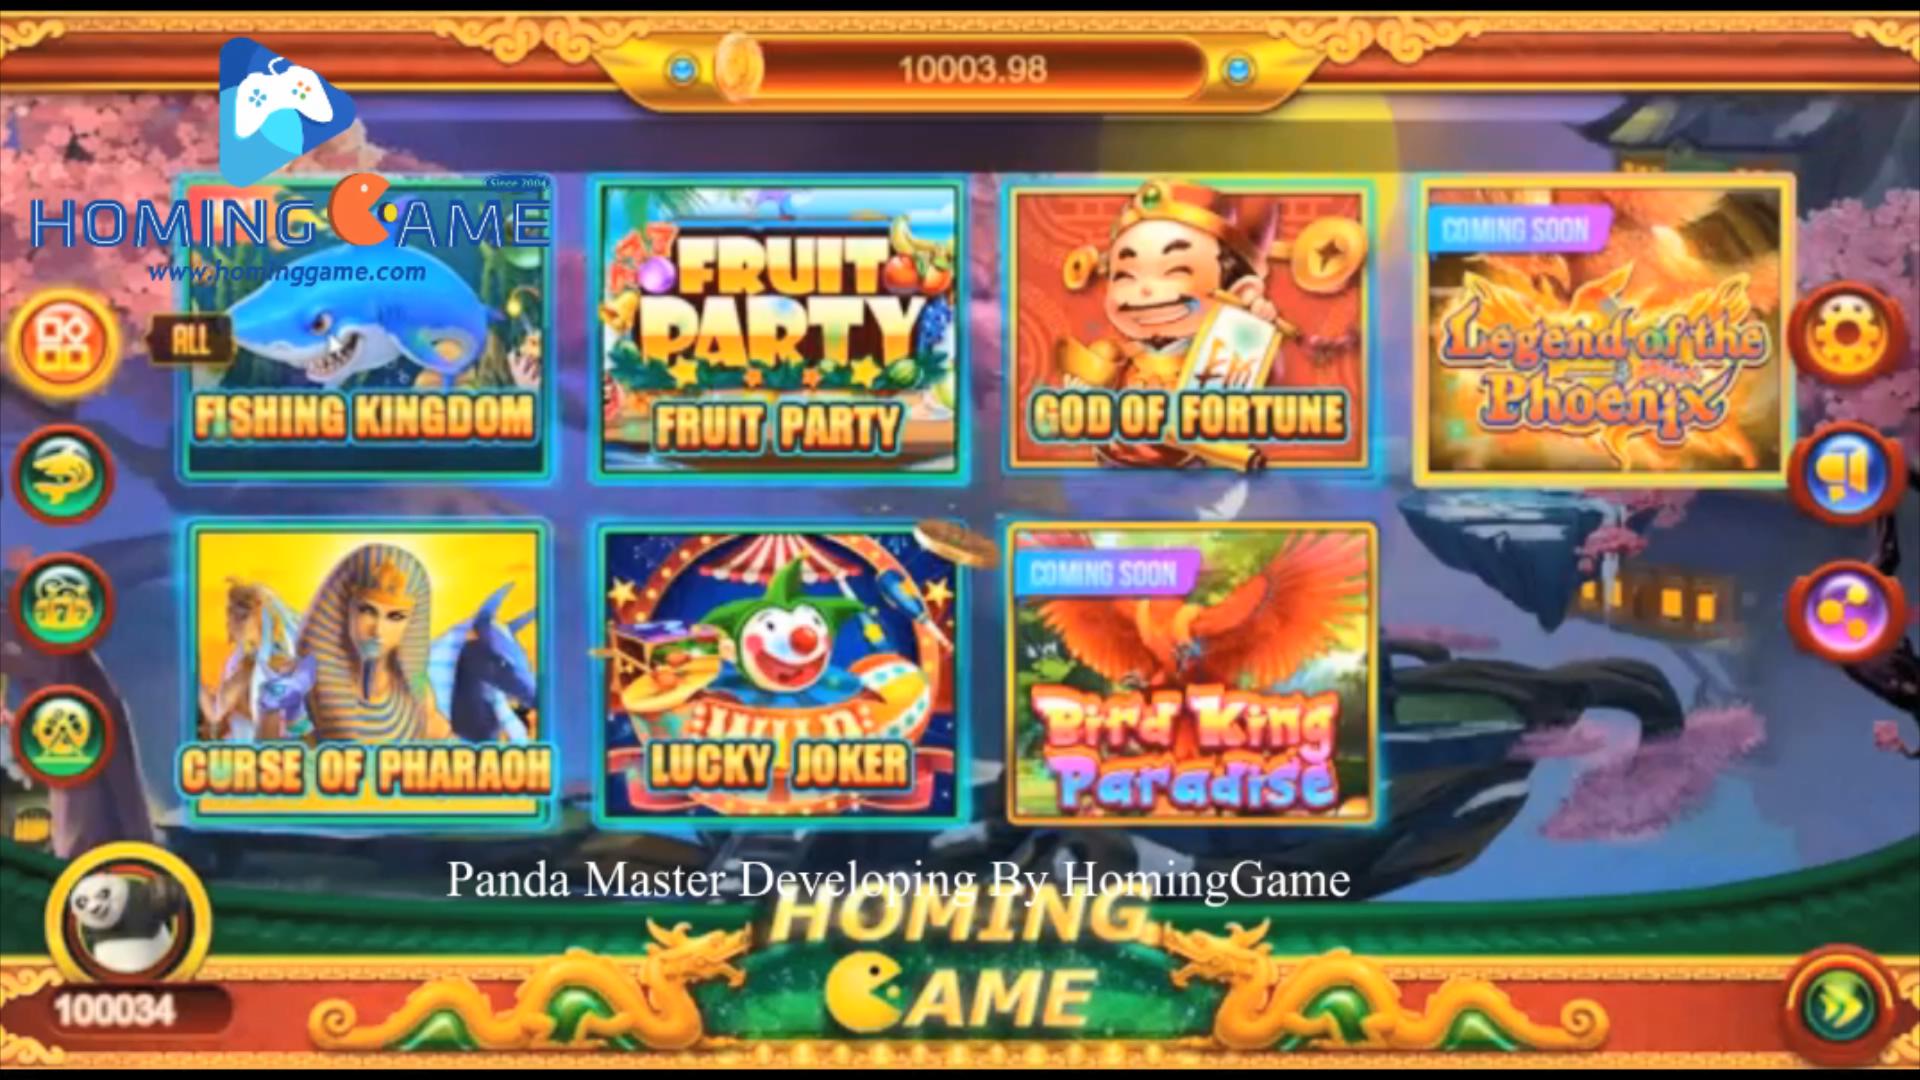 Selling Panda Master Online mobile Original Game Source Code Panda Master developing By HomingGame(Order call whatsapp:+8618688409495),panda master online game,panda master online mobile game,panda master online mobile game,download panda master online gaming apps,MysteryDragons online gaming,MysteryDragons online slot gaming,online fishing game apps,online slot game apps,online gaming system,usa best online fishing game apps,download online fishing game apps,download online slot game apps,download online gaming system,USA best fishing table game machine supplier and manufacturer by HomingGame Specialize in manufacture fishing Game(Order Call Whatsapp:+8618688409495),fishing game,fishing table,fishing table game machine,fishing game machine,fishing arcade game machine,fish hunter fishing game machine,upright table fishing game machine,standup fishing game machine,ocean king 3 fishing game machine,capatian america fishing game machine,tiger stirke fishing game machine,godzilla fishing game machine,rampage fishing game machine,dragon legend fishing game machine,ocean king,igs fishing game machine,electrical fishing game machine,usa fishing game machine,ocean king 2 fishing gam emachine,fishing game machine supplier,fishing game machine manufacturer,gaming machine,gambling machine,game machine,arcade game machine,coin operated game machine,indoor game machine,electrical game machine,amusement park game equipment,amusement machine,gaming,casino gaming machine,usa fishing game machine supplier,USA fishing table game machine manufacturer,fishing game cheats,fishing game skills,how to paly the fishing game machine,fishing game decoding,fishing game decoder box,hominggame,www.gametube.hk,hominggame fishing game,entertainment game machine,family entertainment game machine,arcade game machine for sale